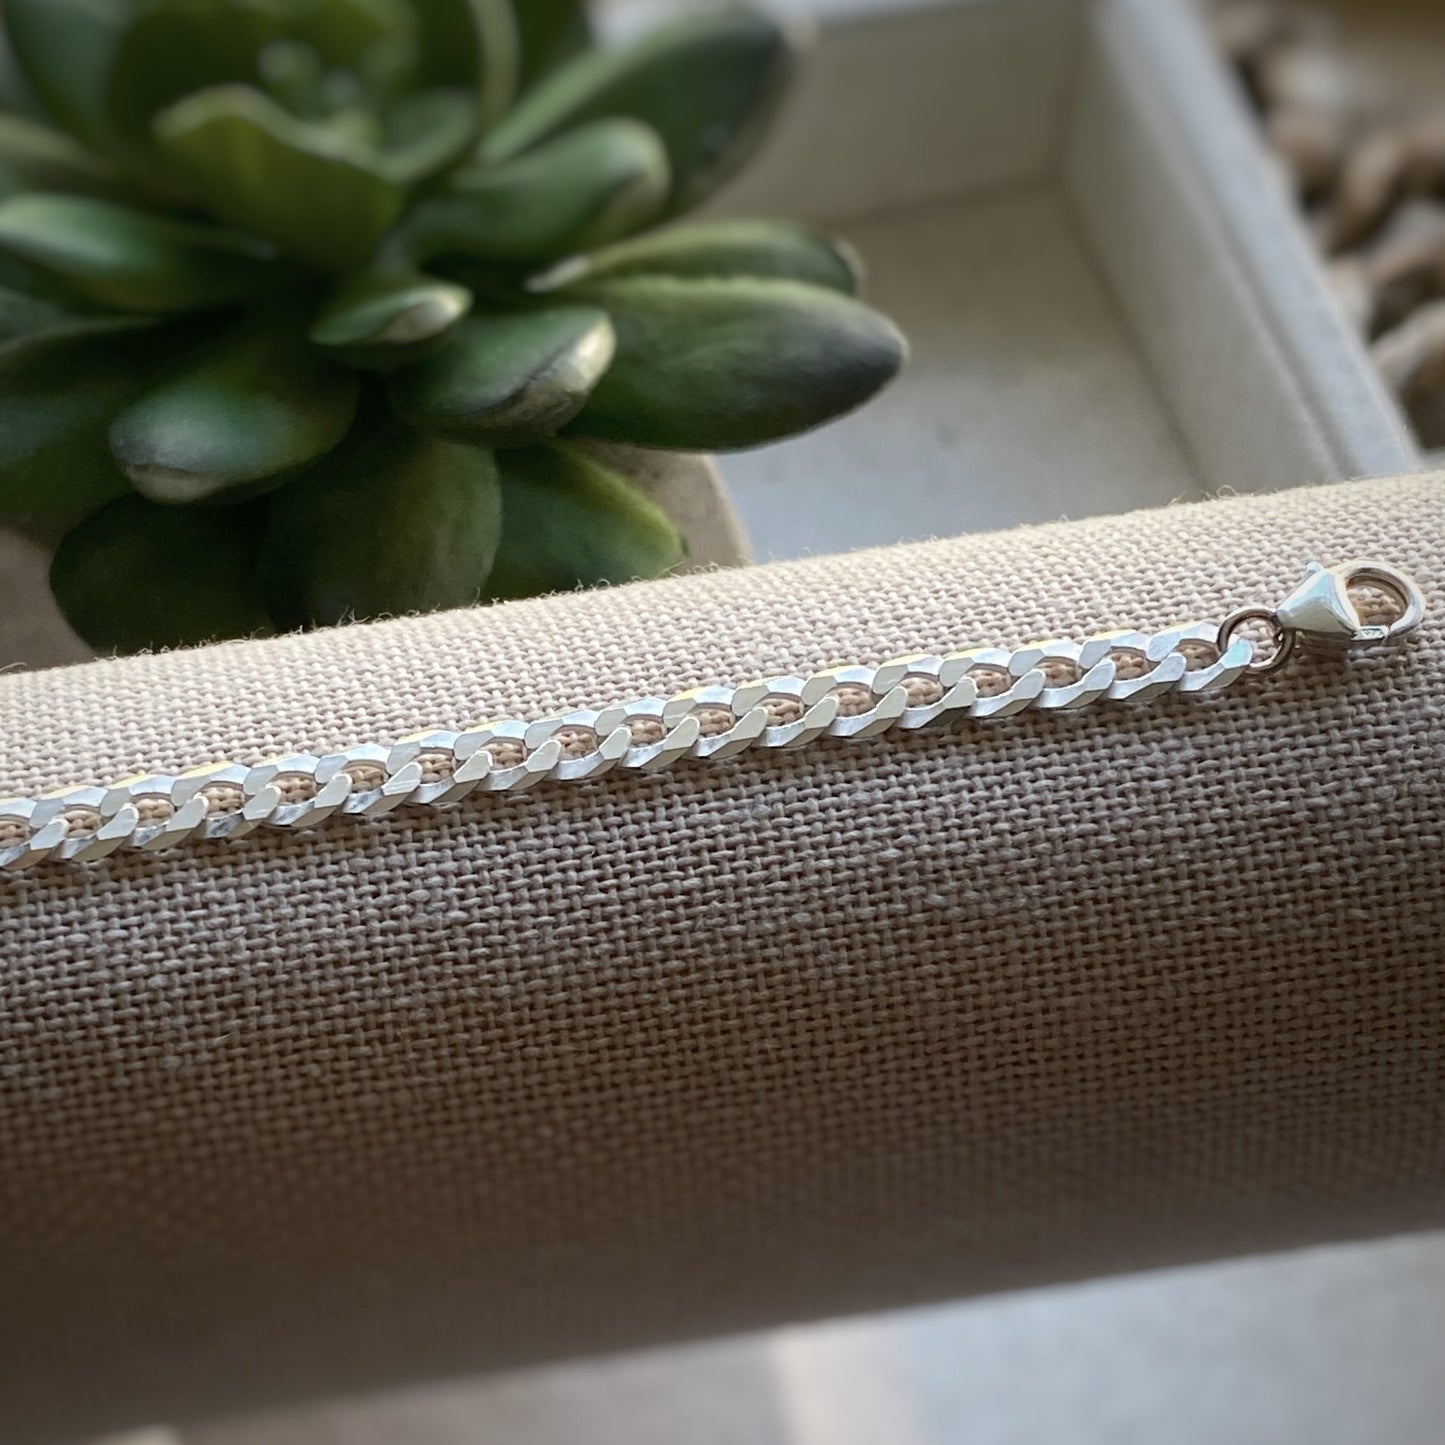 Pearl Curb Link Chain Bracelet Sterling Silver Stacking Layering Jewelry